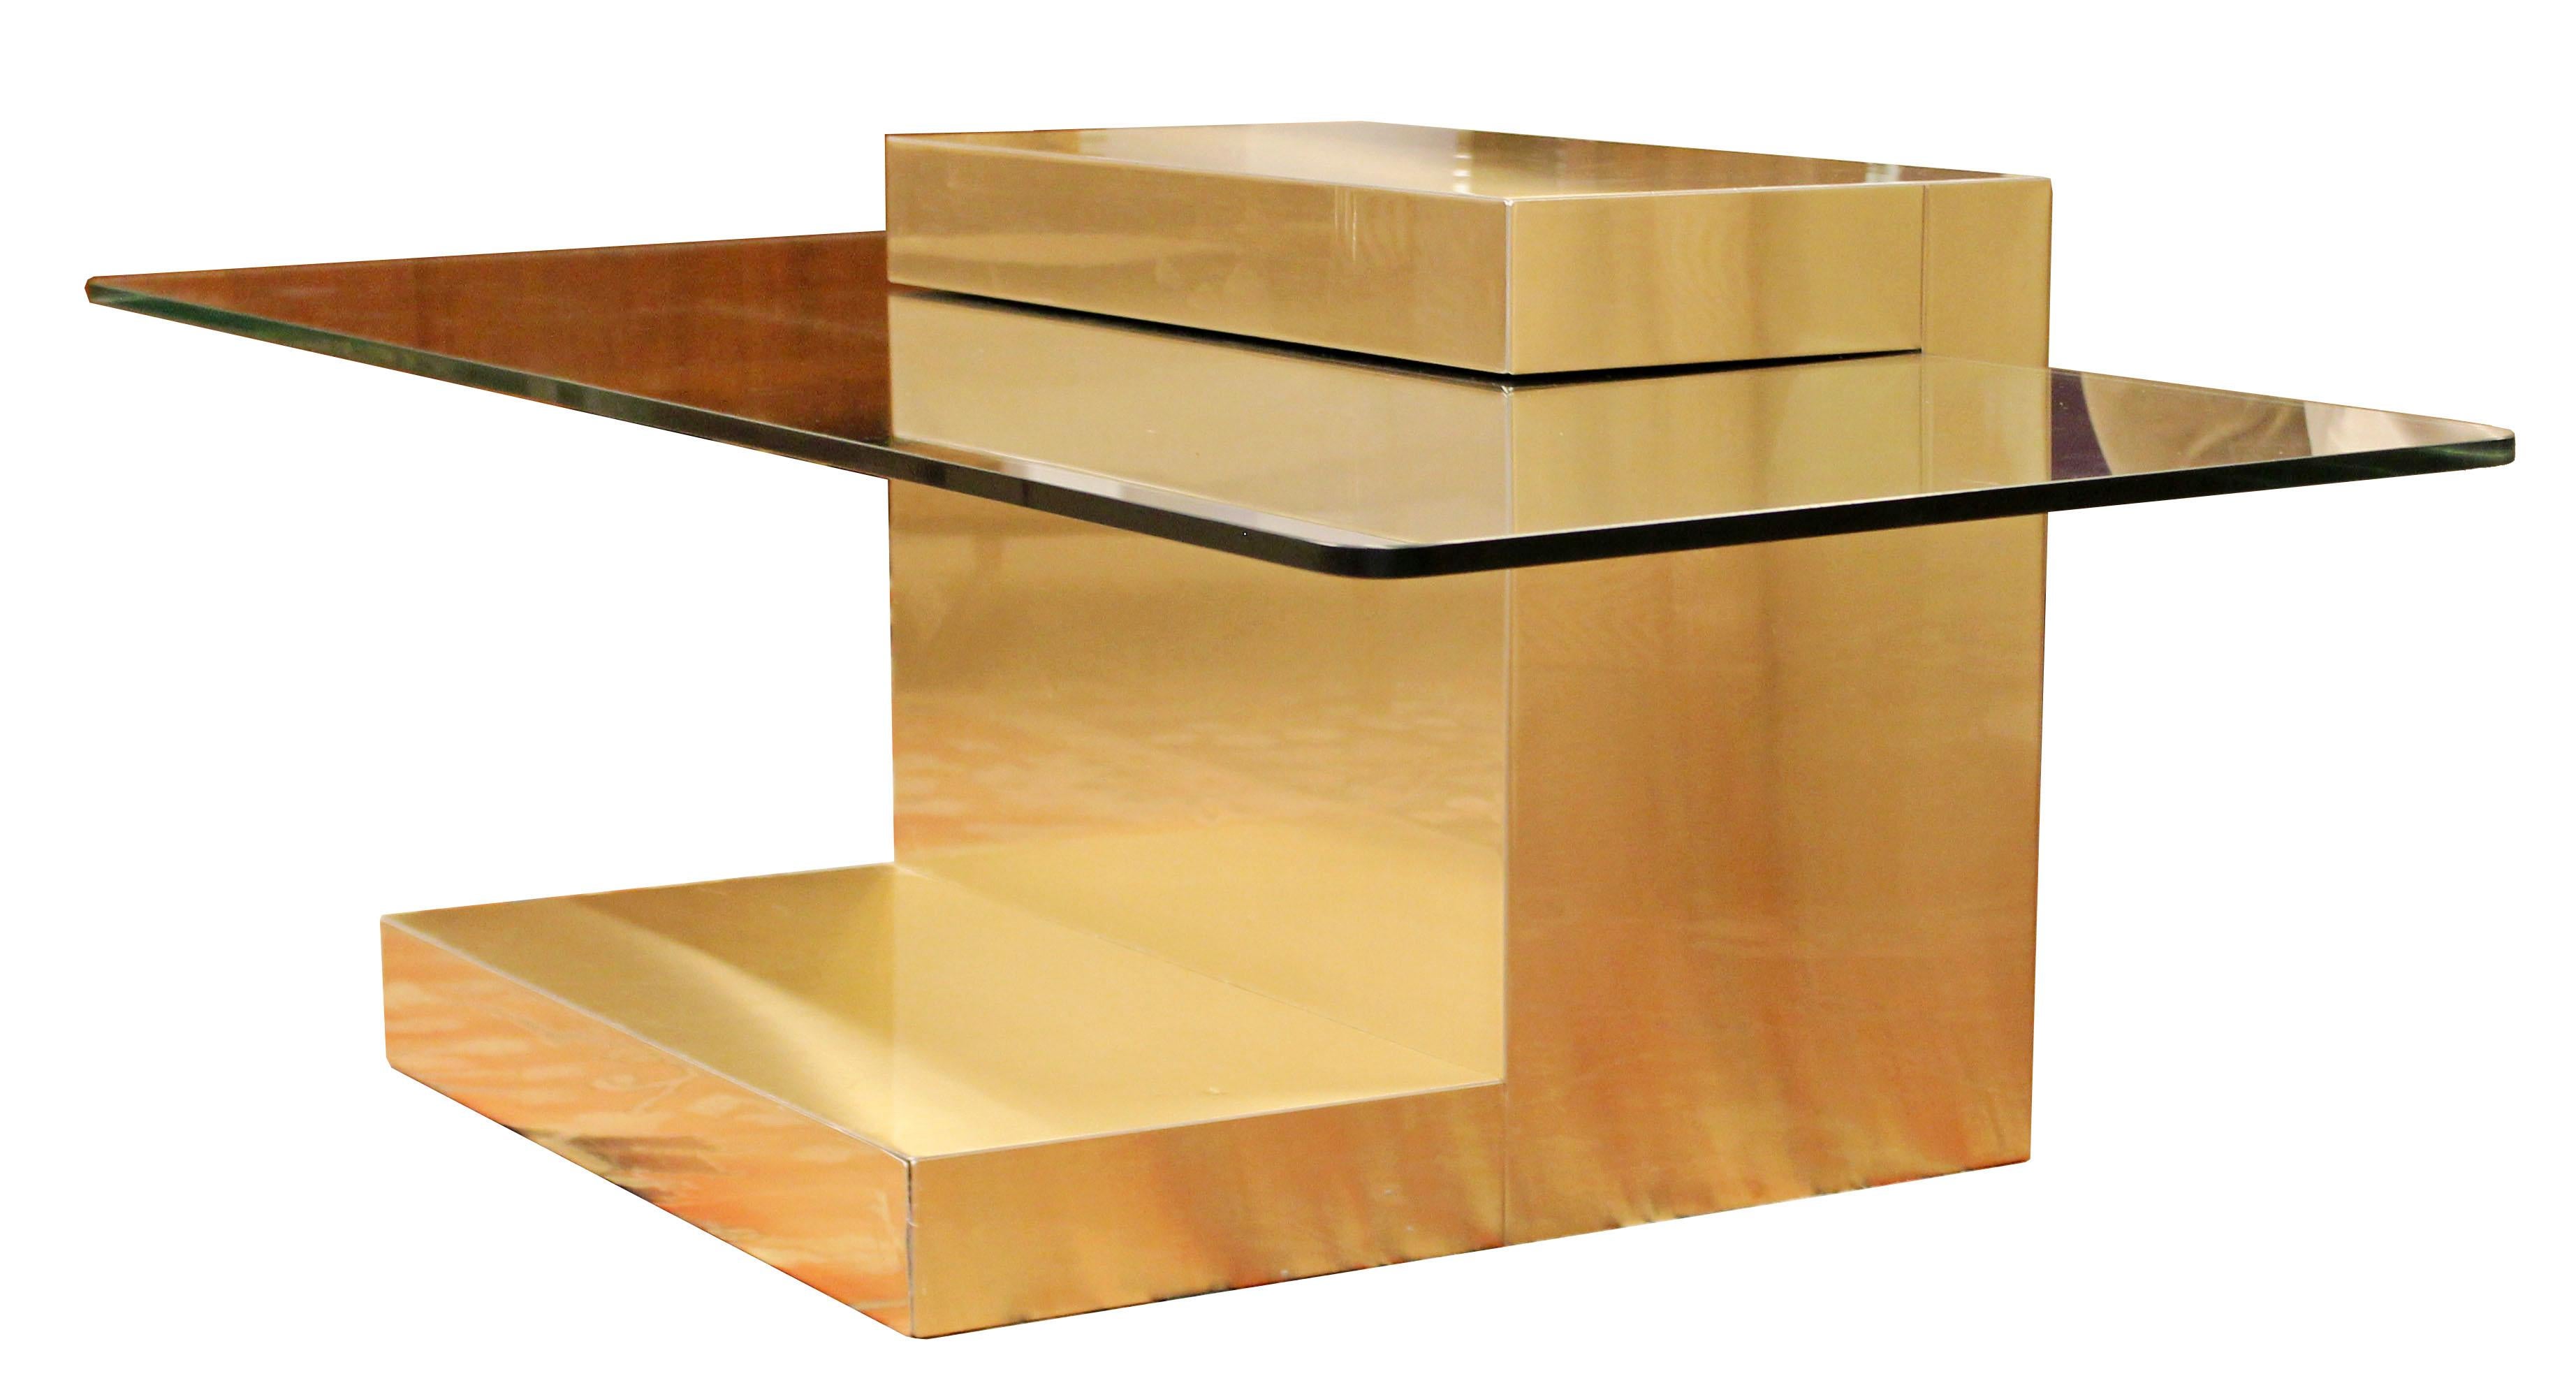 For your consideration is a phenomenal, cantilever, brass coffee table with a set in glass top, by Paul Evans, circa the 1960s. In good condition, with scratches and dents in the brass. The dimensions are 54